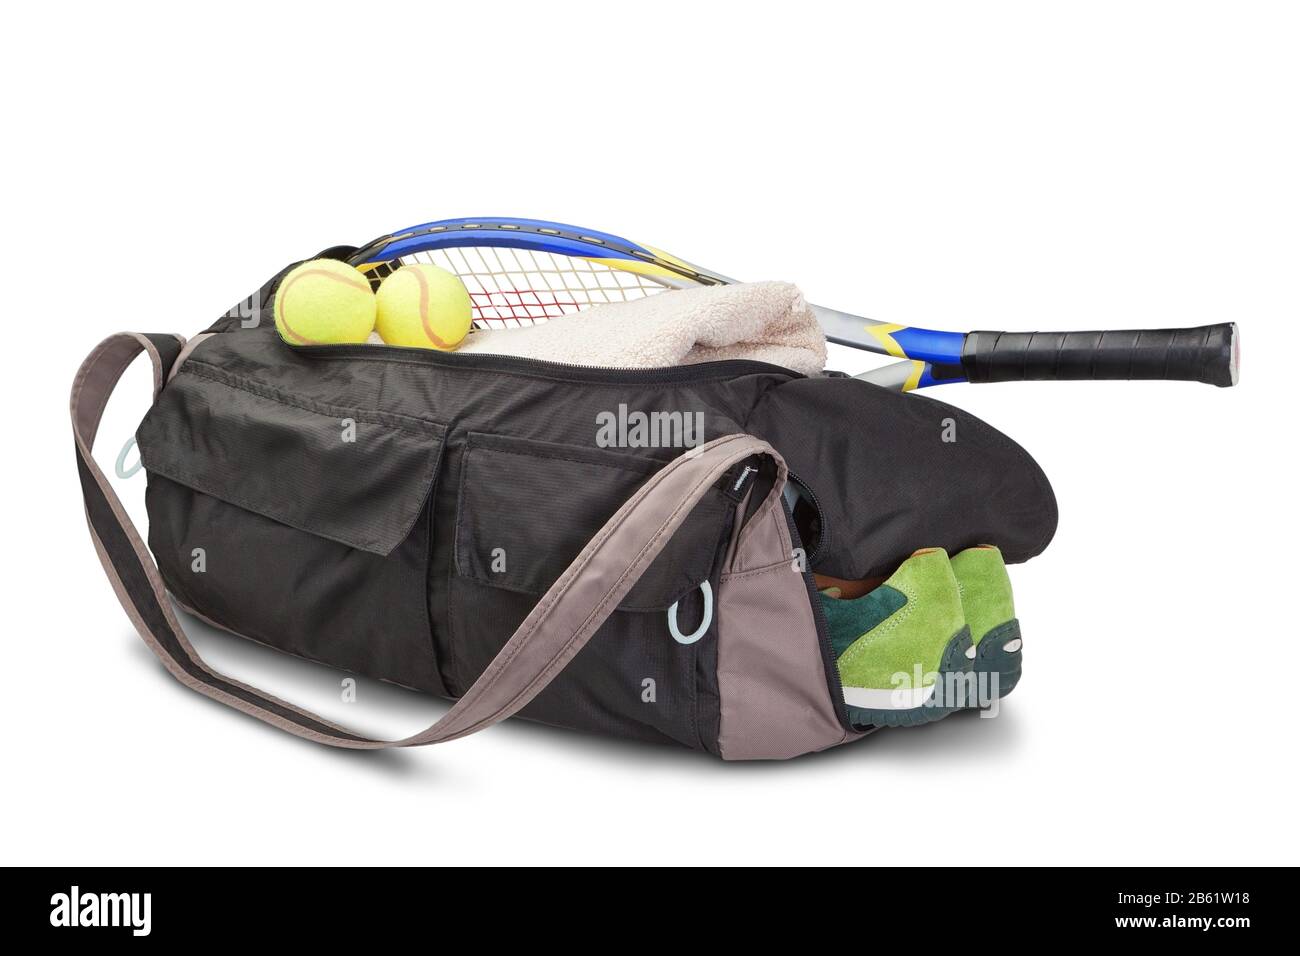 Tennis sports bag. With the racket and tennis ball. Stock Photo